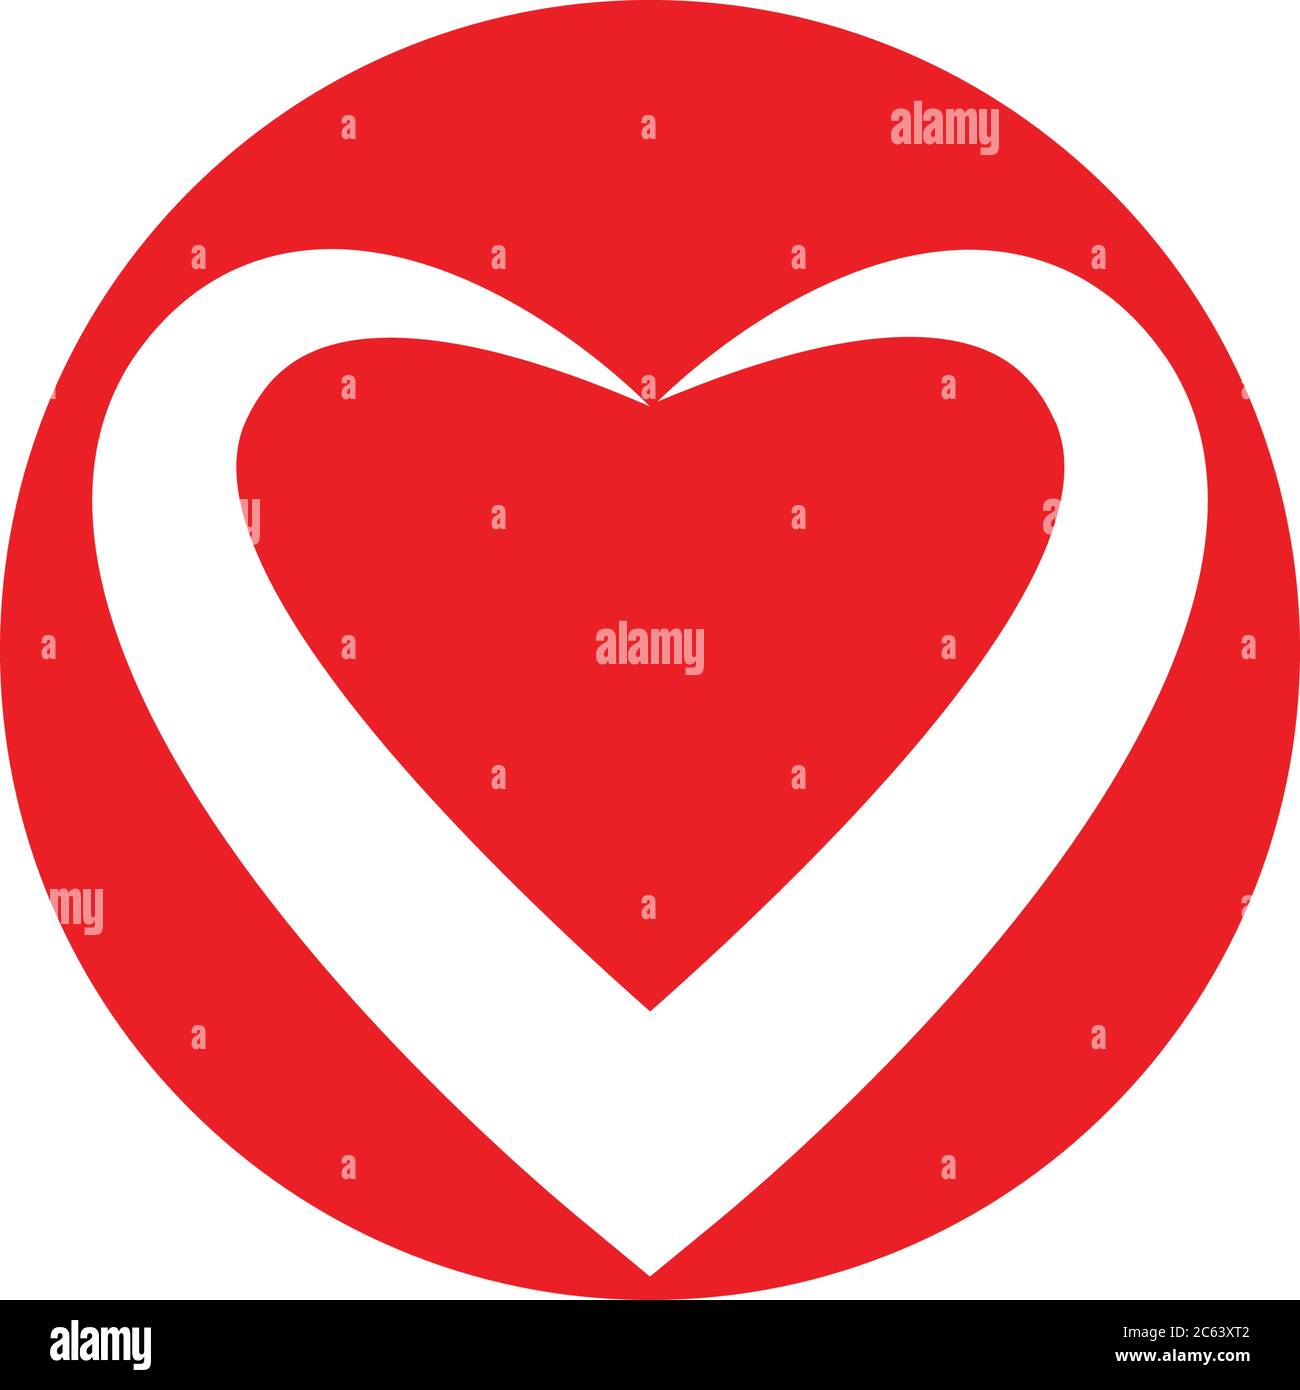 Heart V Logo Images – Browse 6,995 Stock Photos, Vectors, and